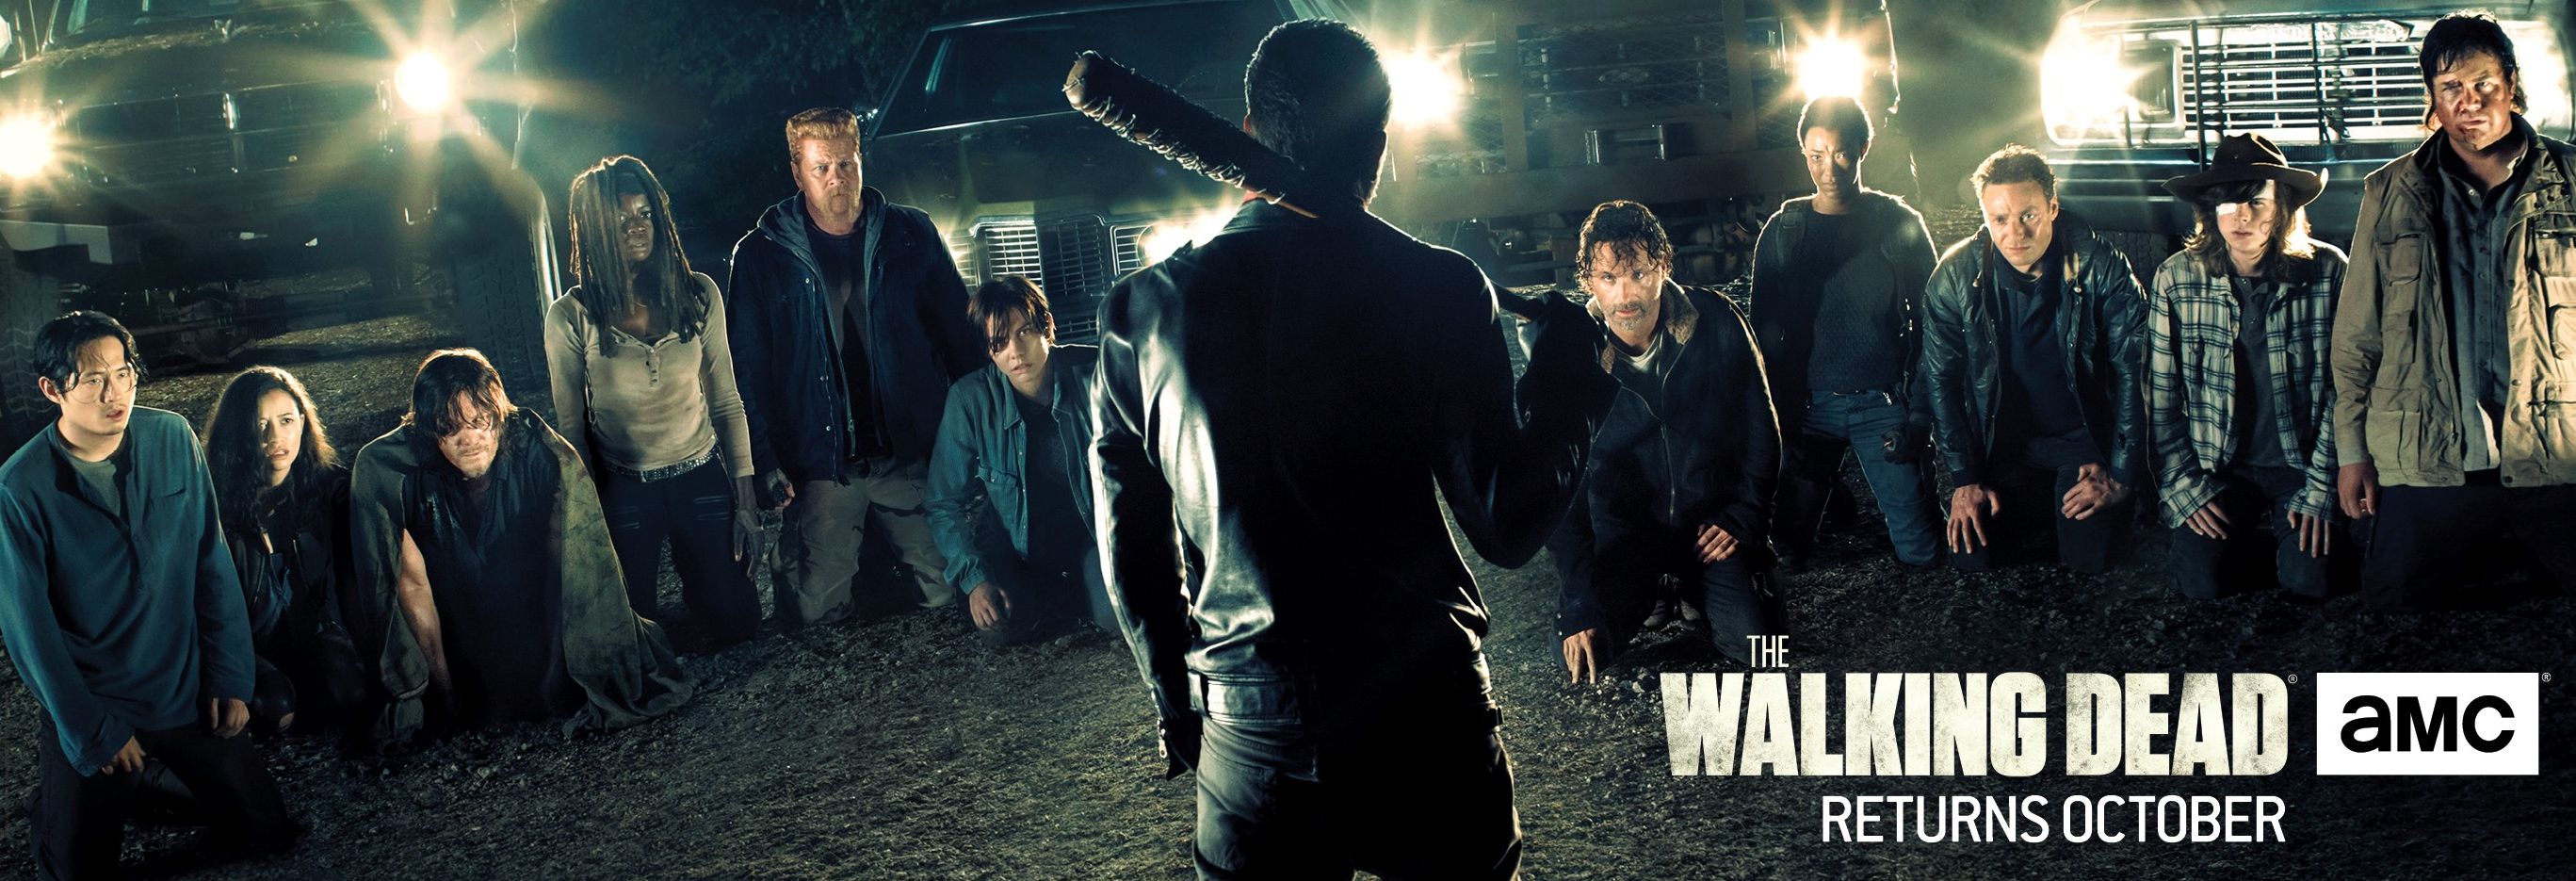 First poster art revealed for &#039;The Walking Dead&#039; Season 7 Ah